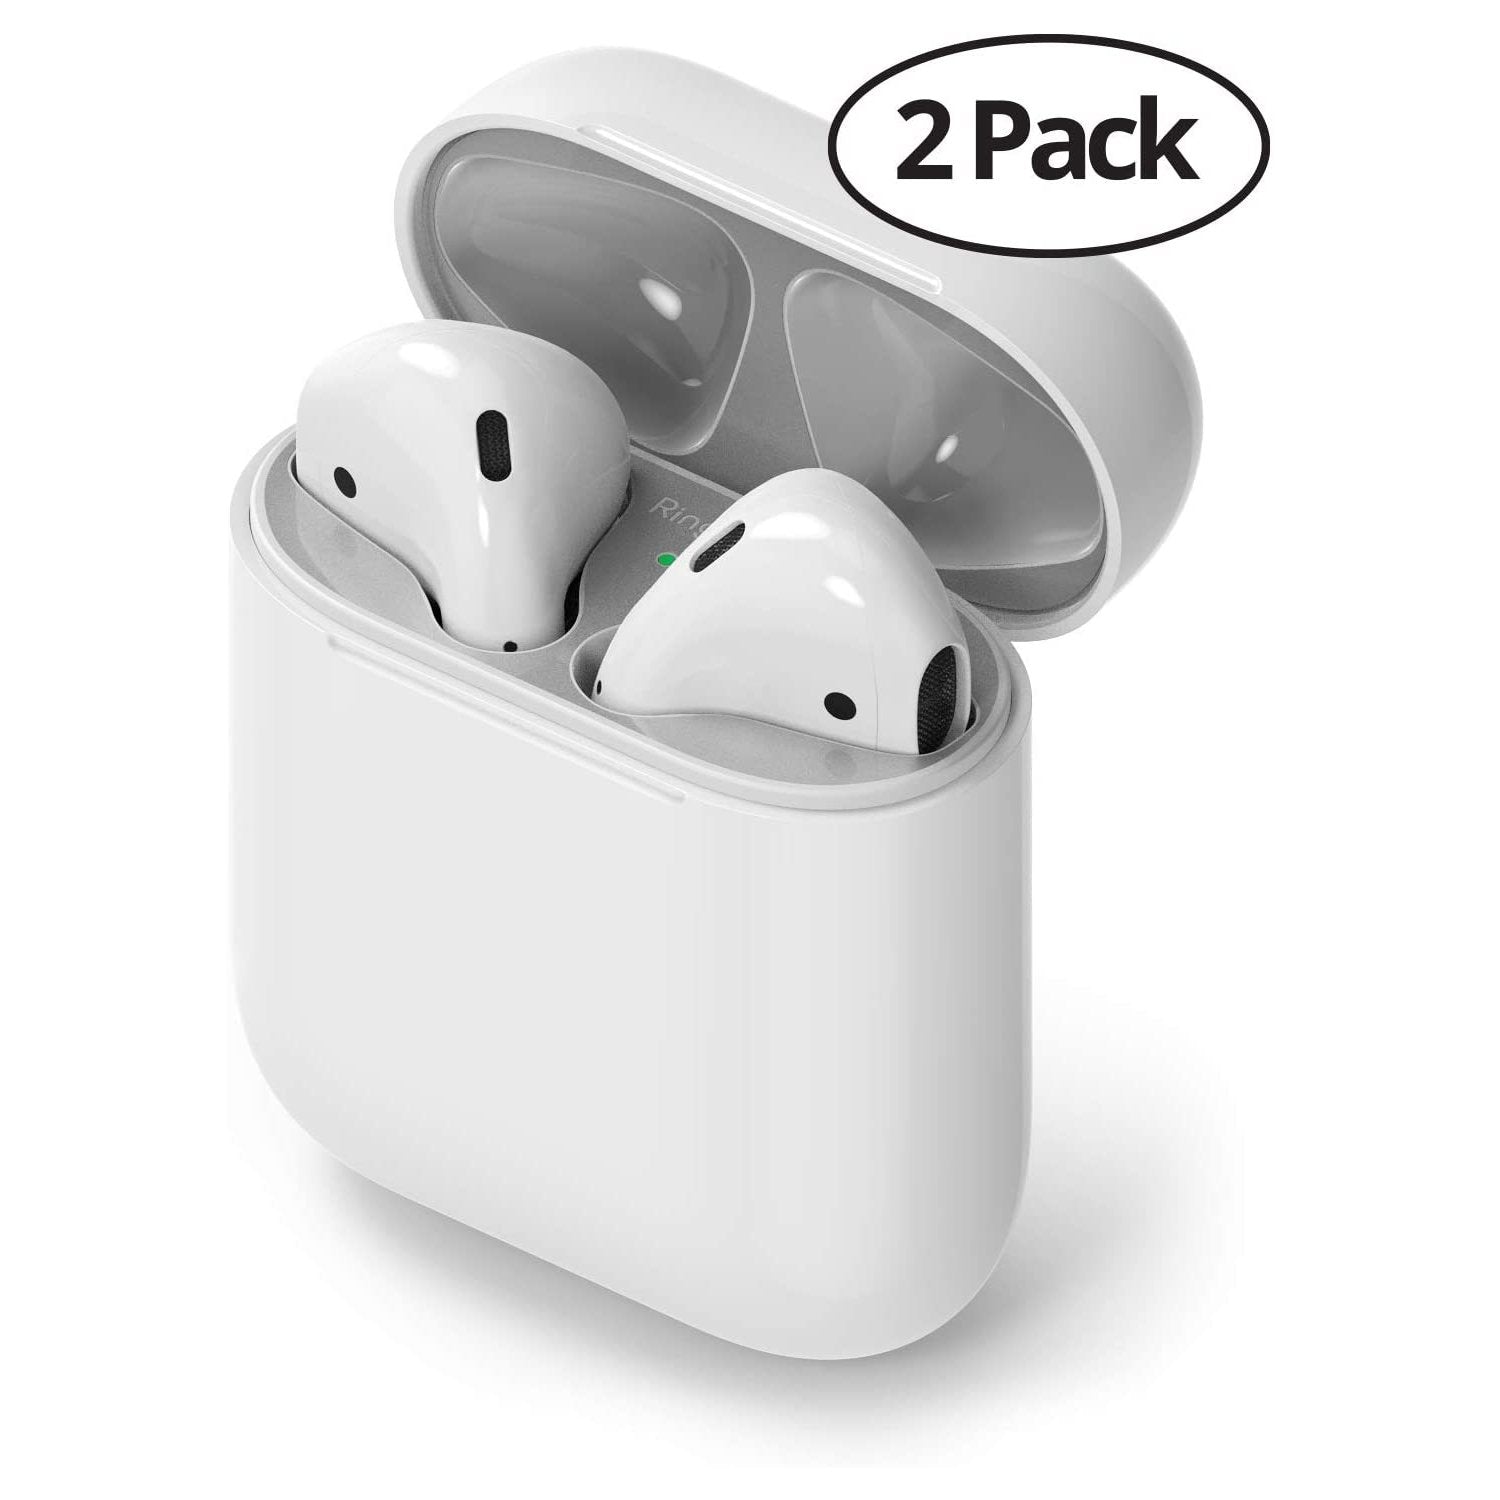 Ringke Dust Guard Sticker for Airpods Pro/Airpods 1/2(2pack)